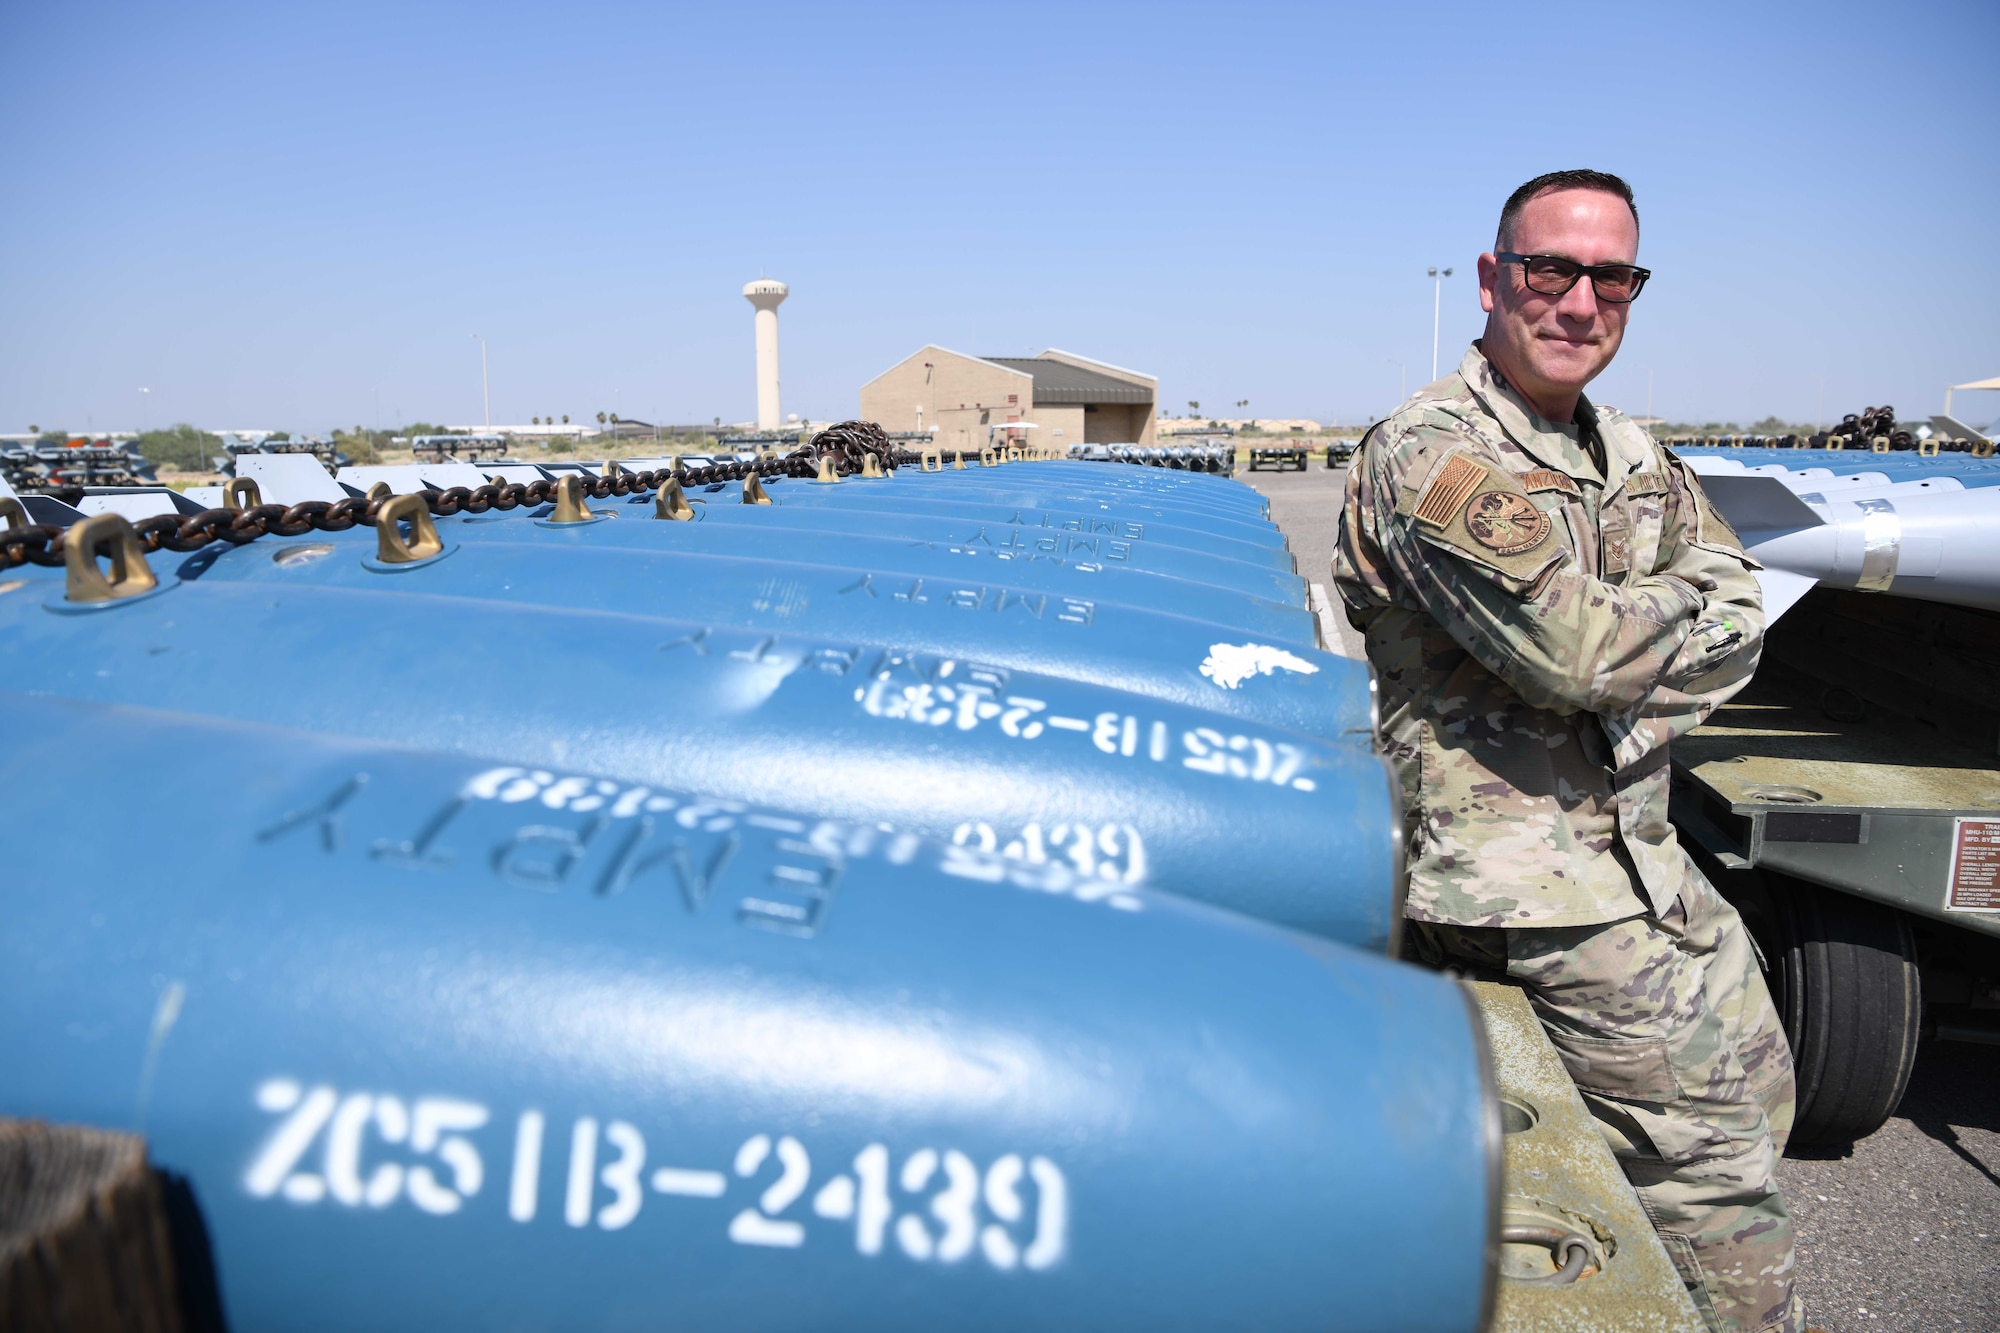 LUKE AIR FORCE BASE, Ariz. -- Reserve Citizen Airman Staff Sgt. Stephen Zanzucchi, 944th Maintenance Squadron munitions support equipment maintenance crew chief, poses for a photo at Luke Air Force Base, Arizona, September 16, 2021. Zanzucchi was an elementary school teacher prior to joining the service and is the author of six children’s book. (U.S. Air Force photo/Tech. Sgt. Courtney Richardson)